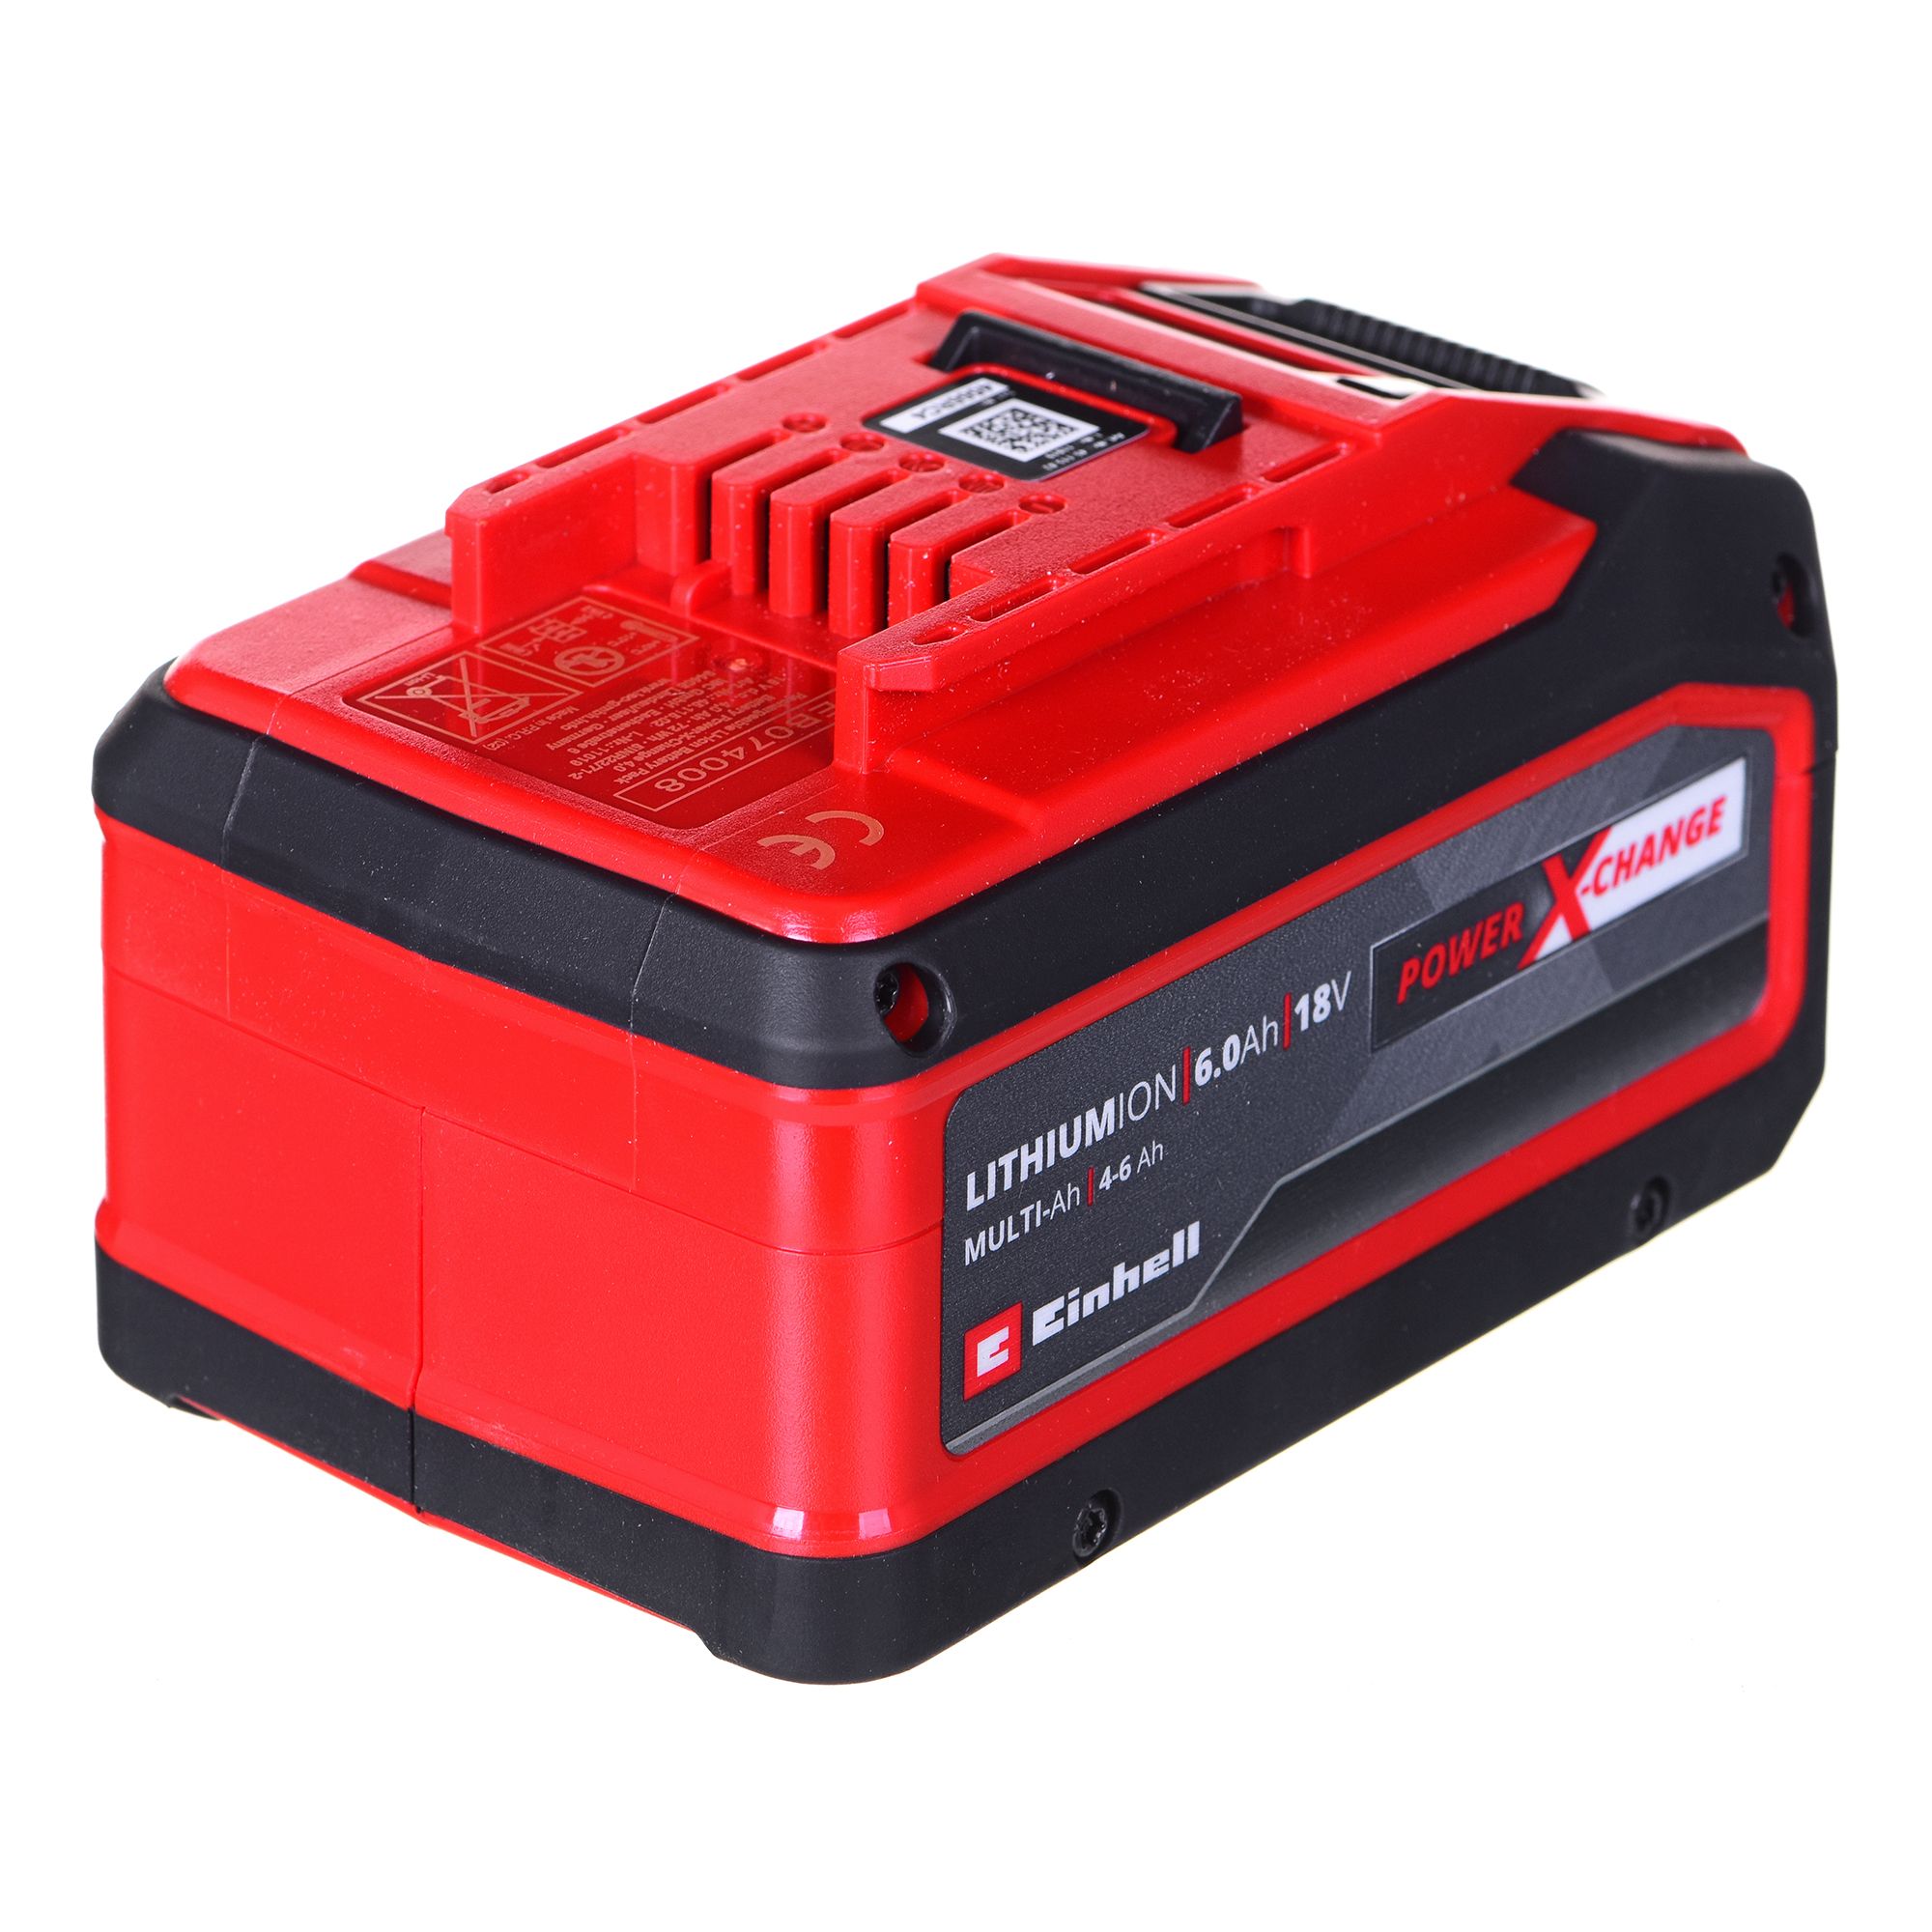 Einhell 4511502 cordless tool battery / charger_3